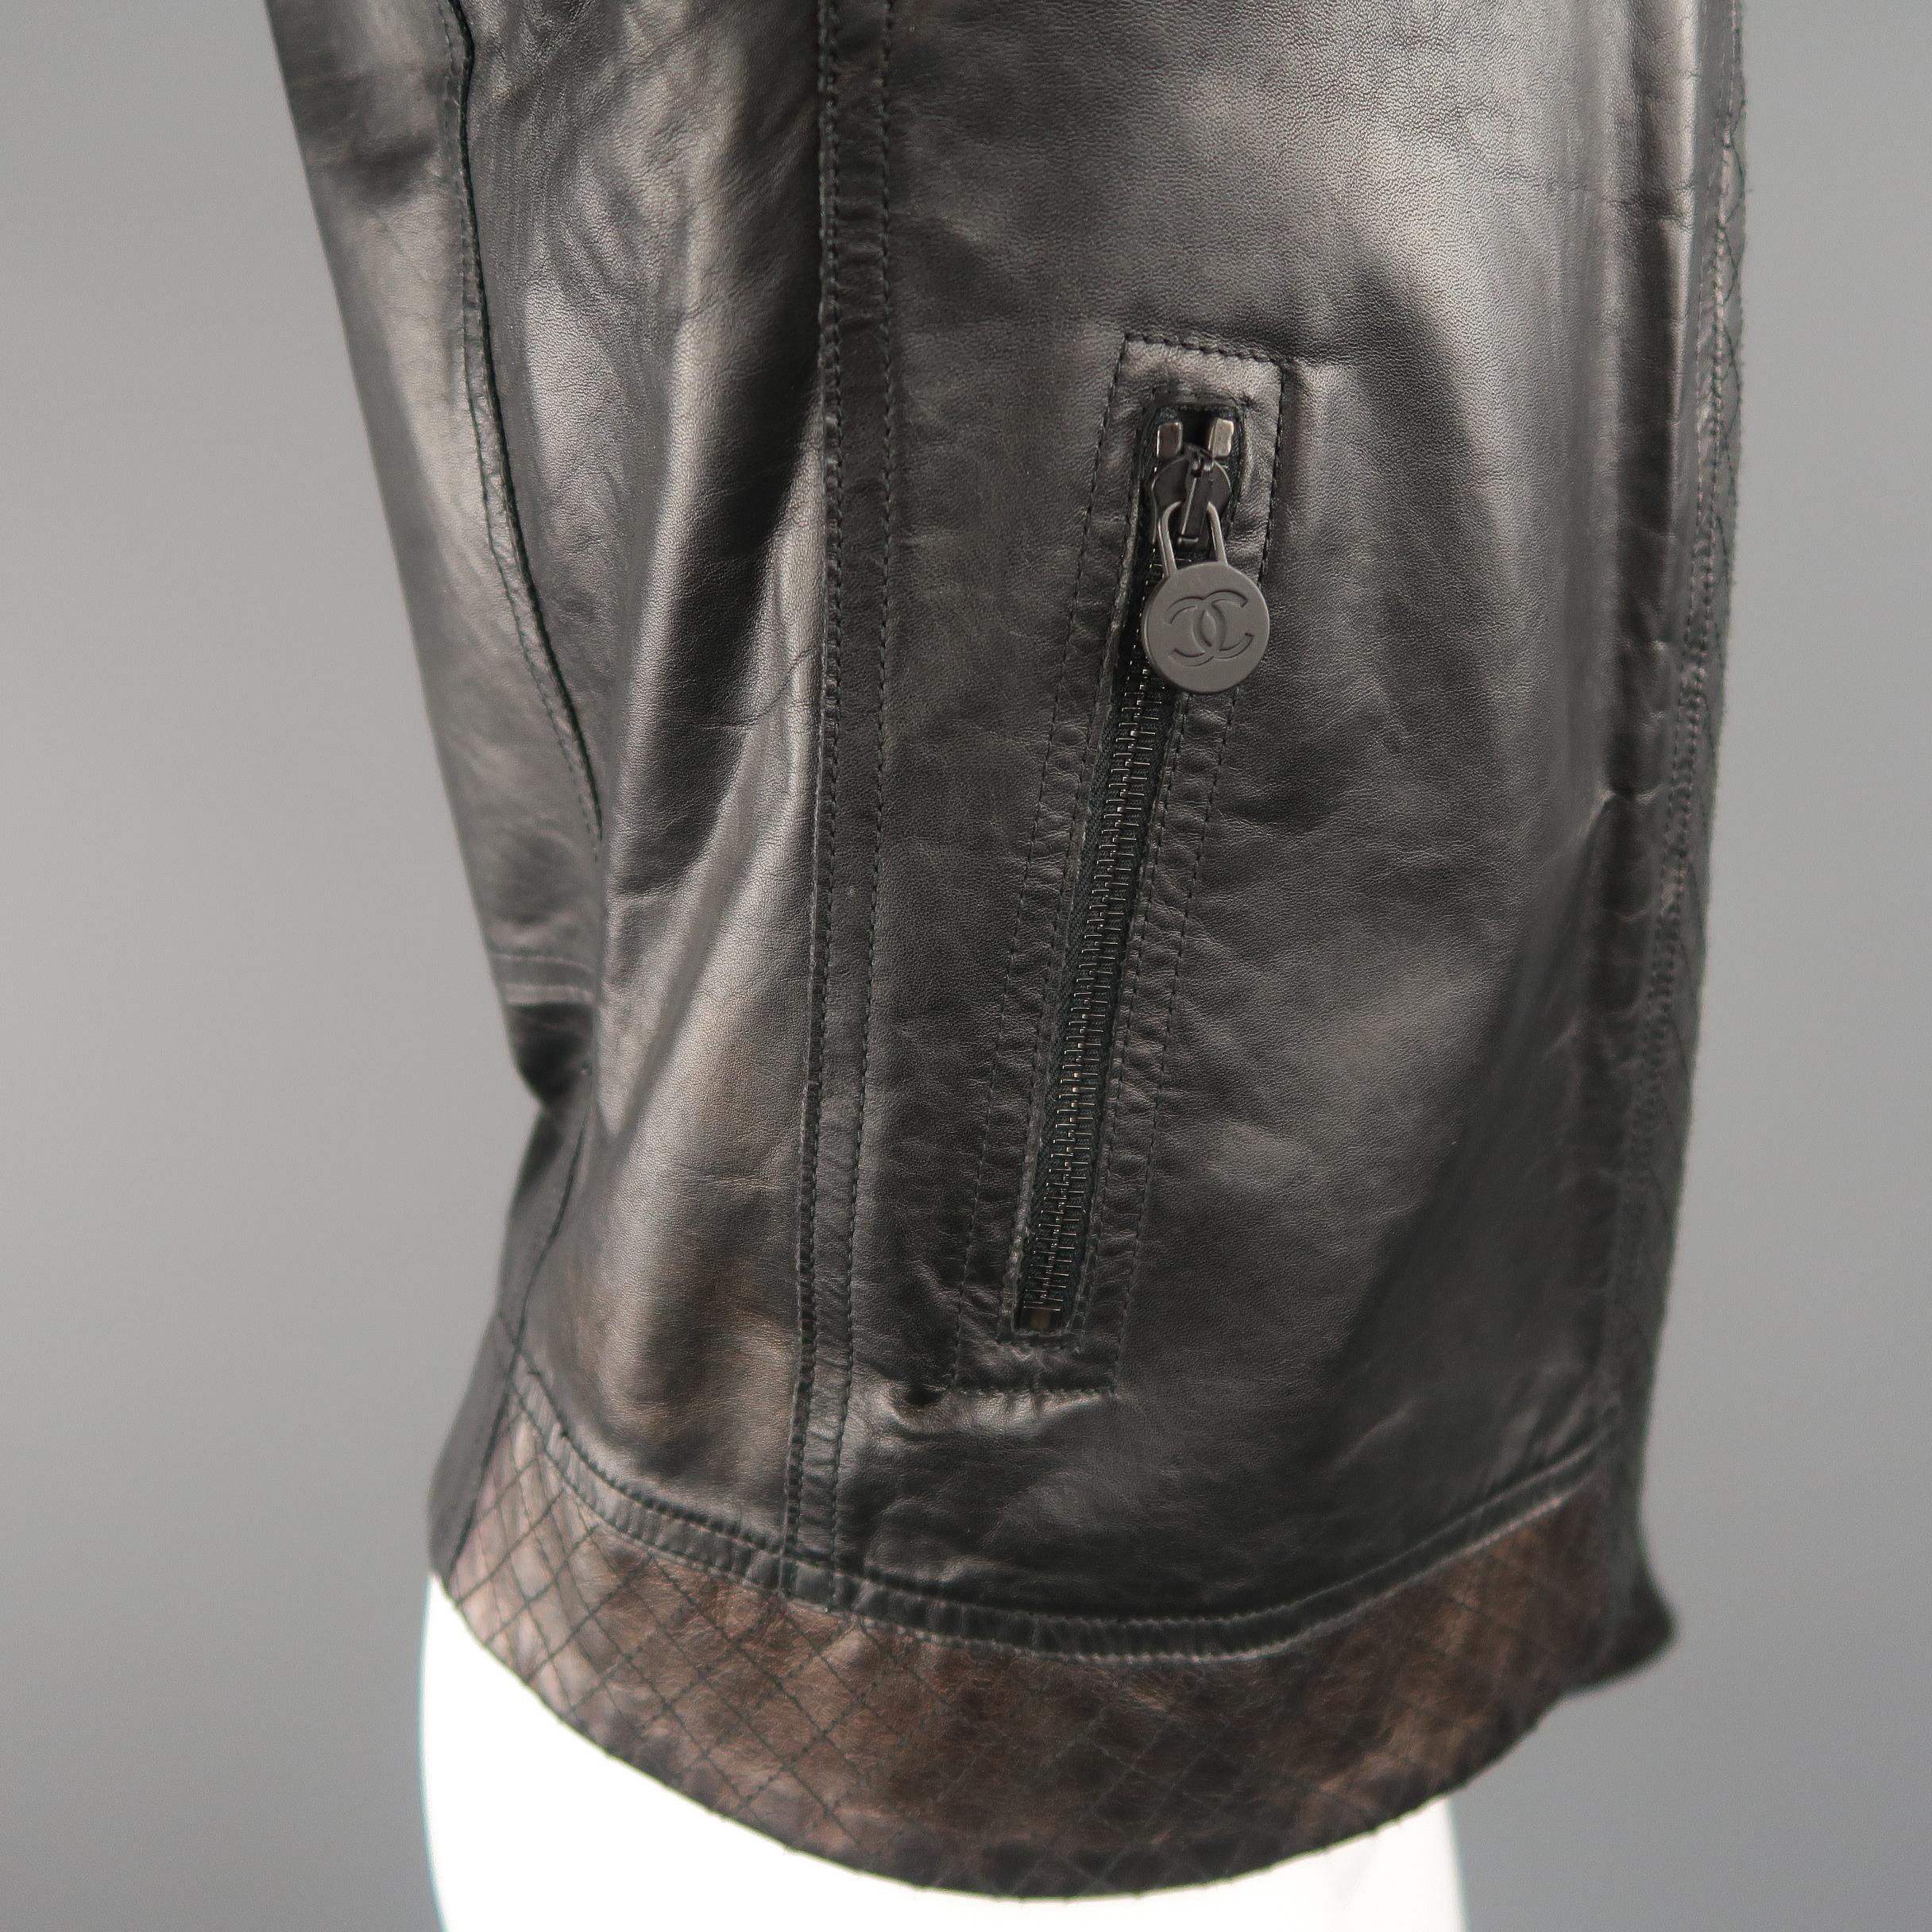 CHANEL Leather Jacket - Size 10 Black Quilted Leather CC Zip Motorcycle Jacket 3